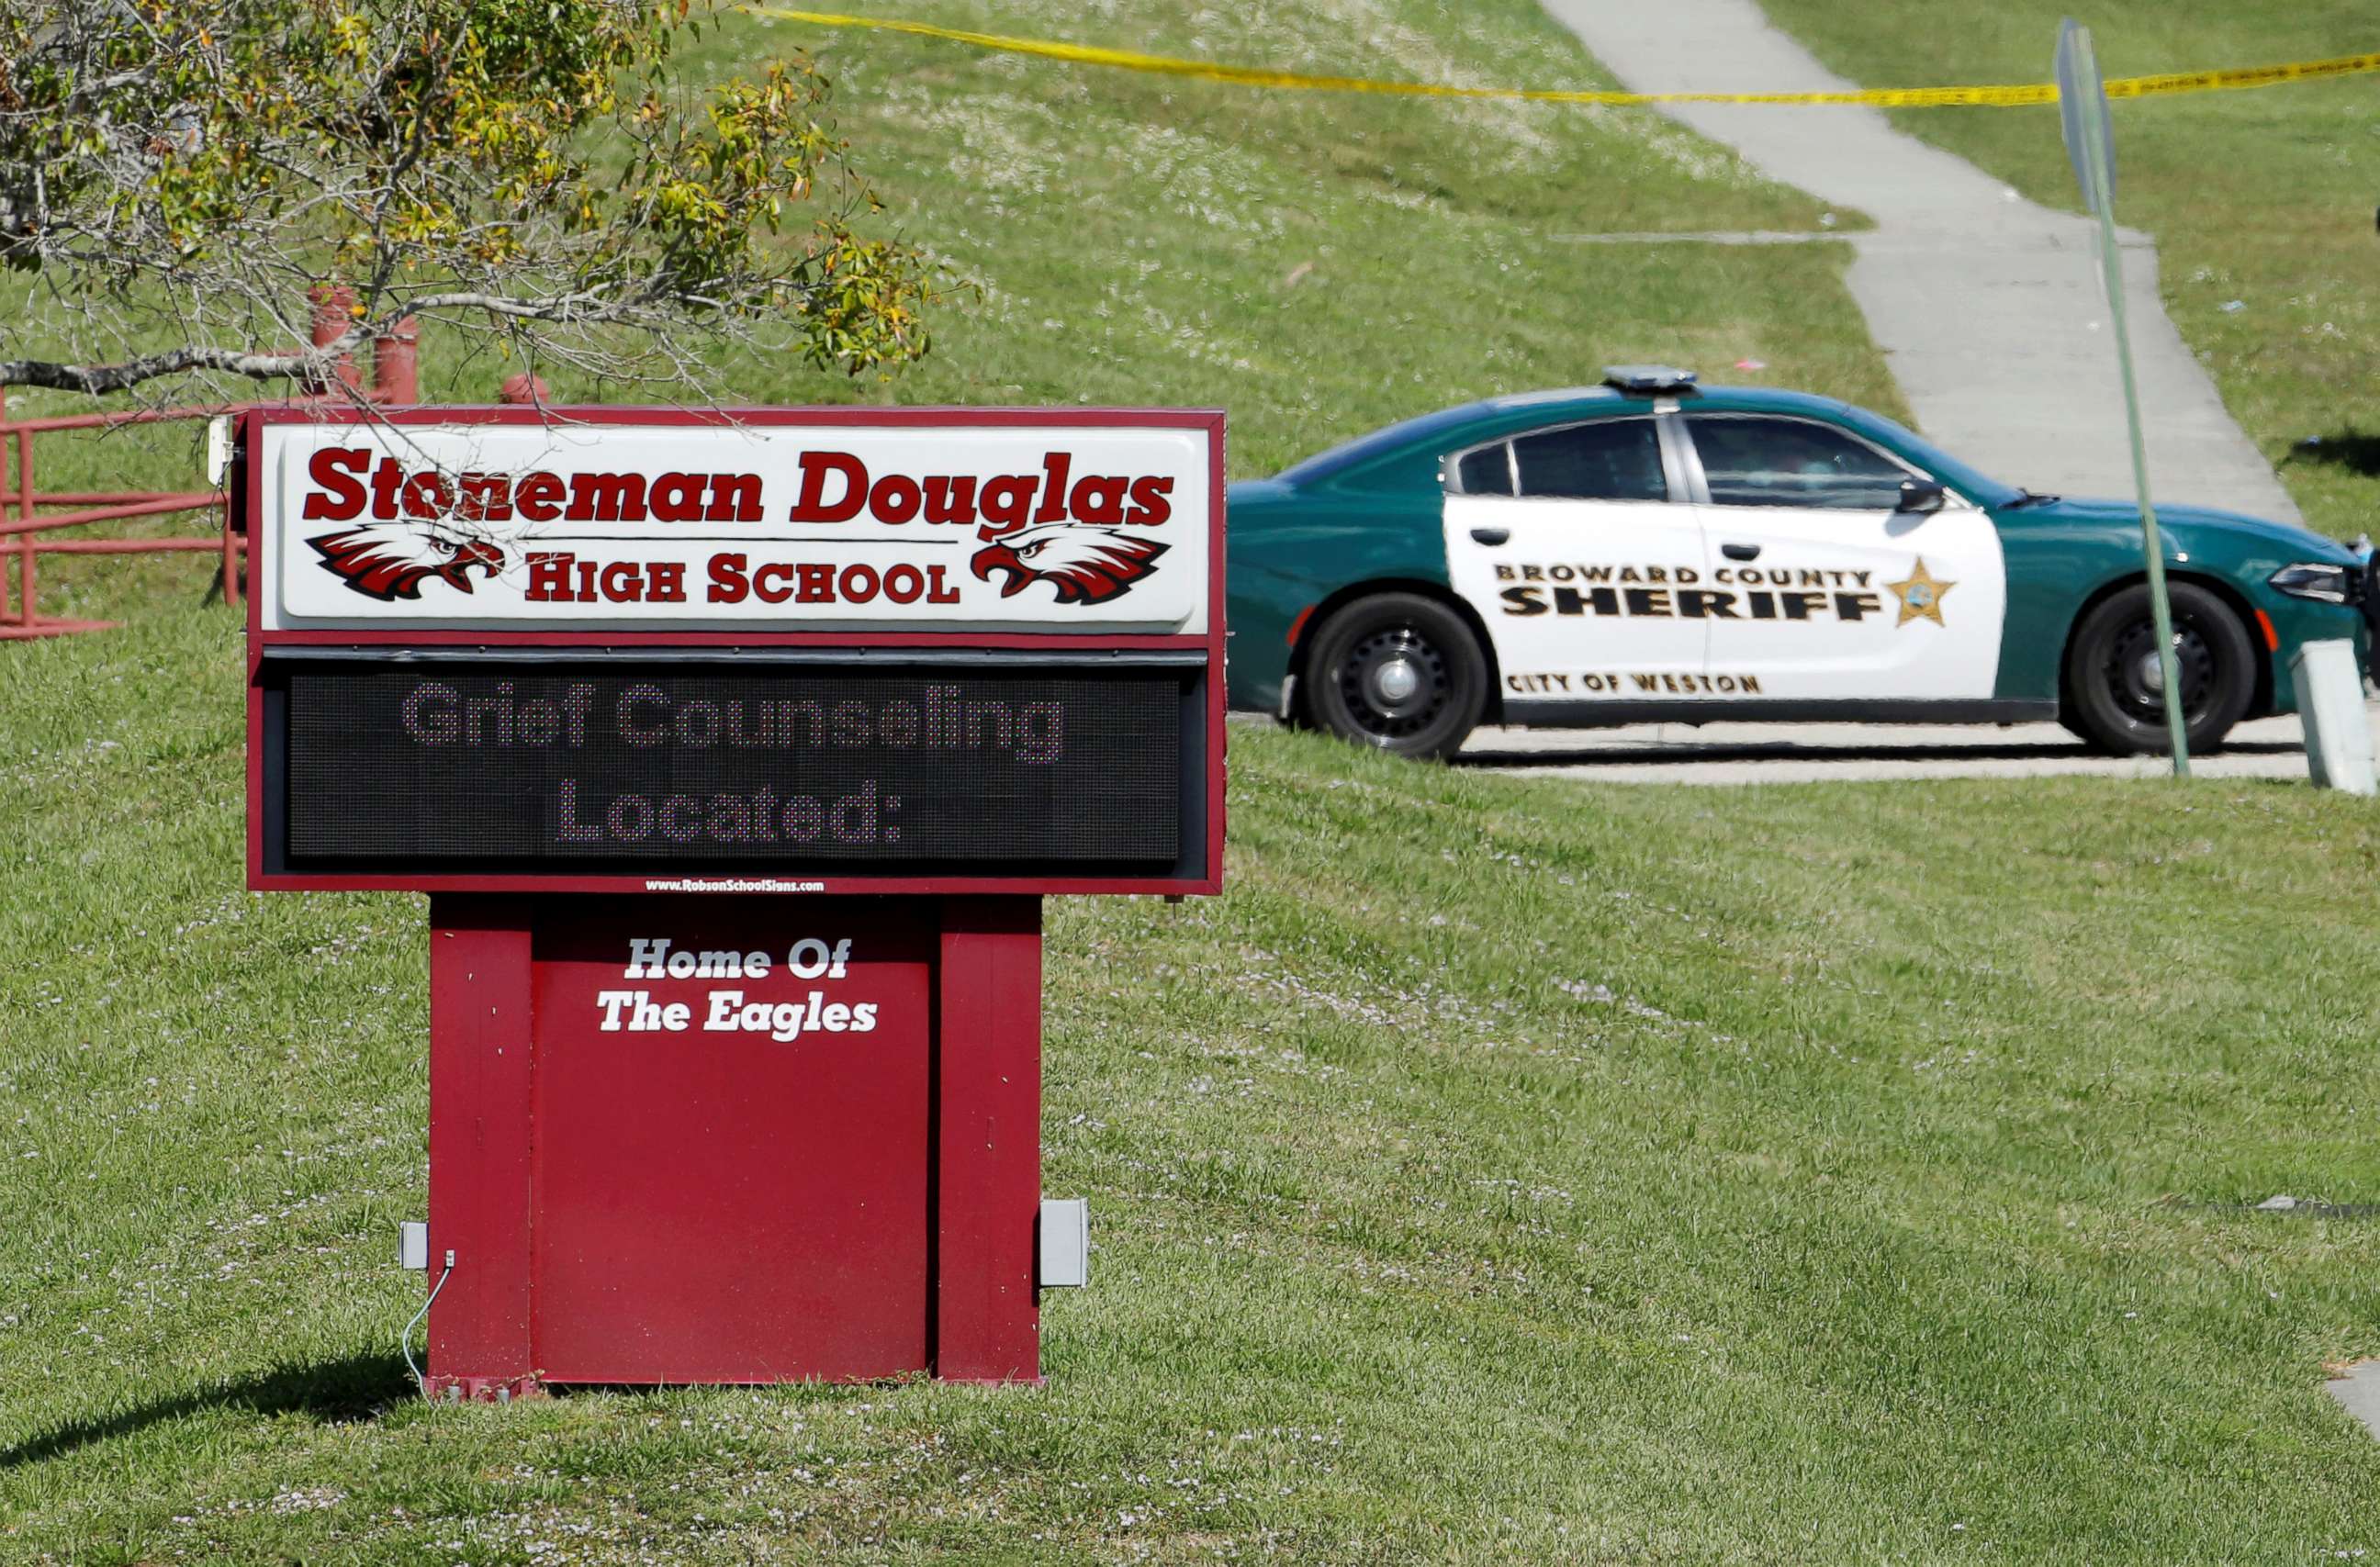 PHOTO: A message about grief counseling appears on the electronic signboard at Marjory Stoneman Douglas High School one day after a shooting at the school left 17 dead in Parkland, Fla., Feb. 15, 2018.